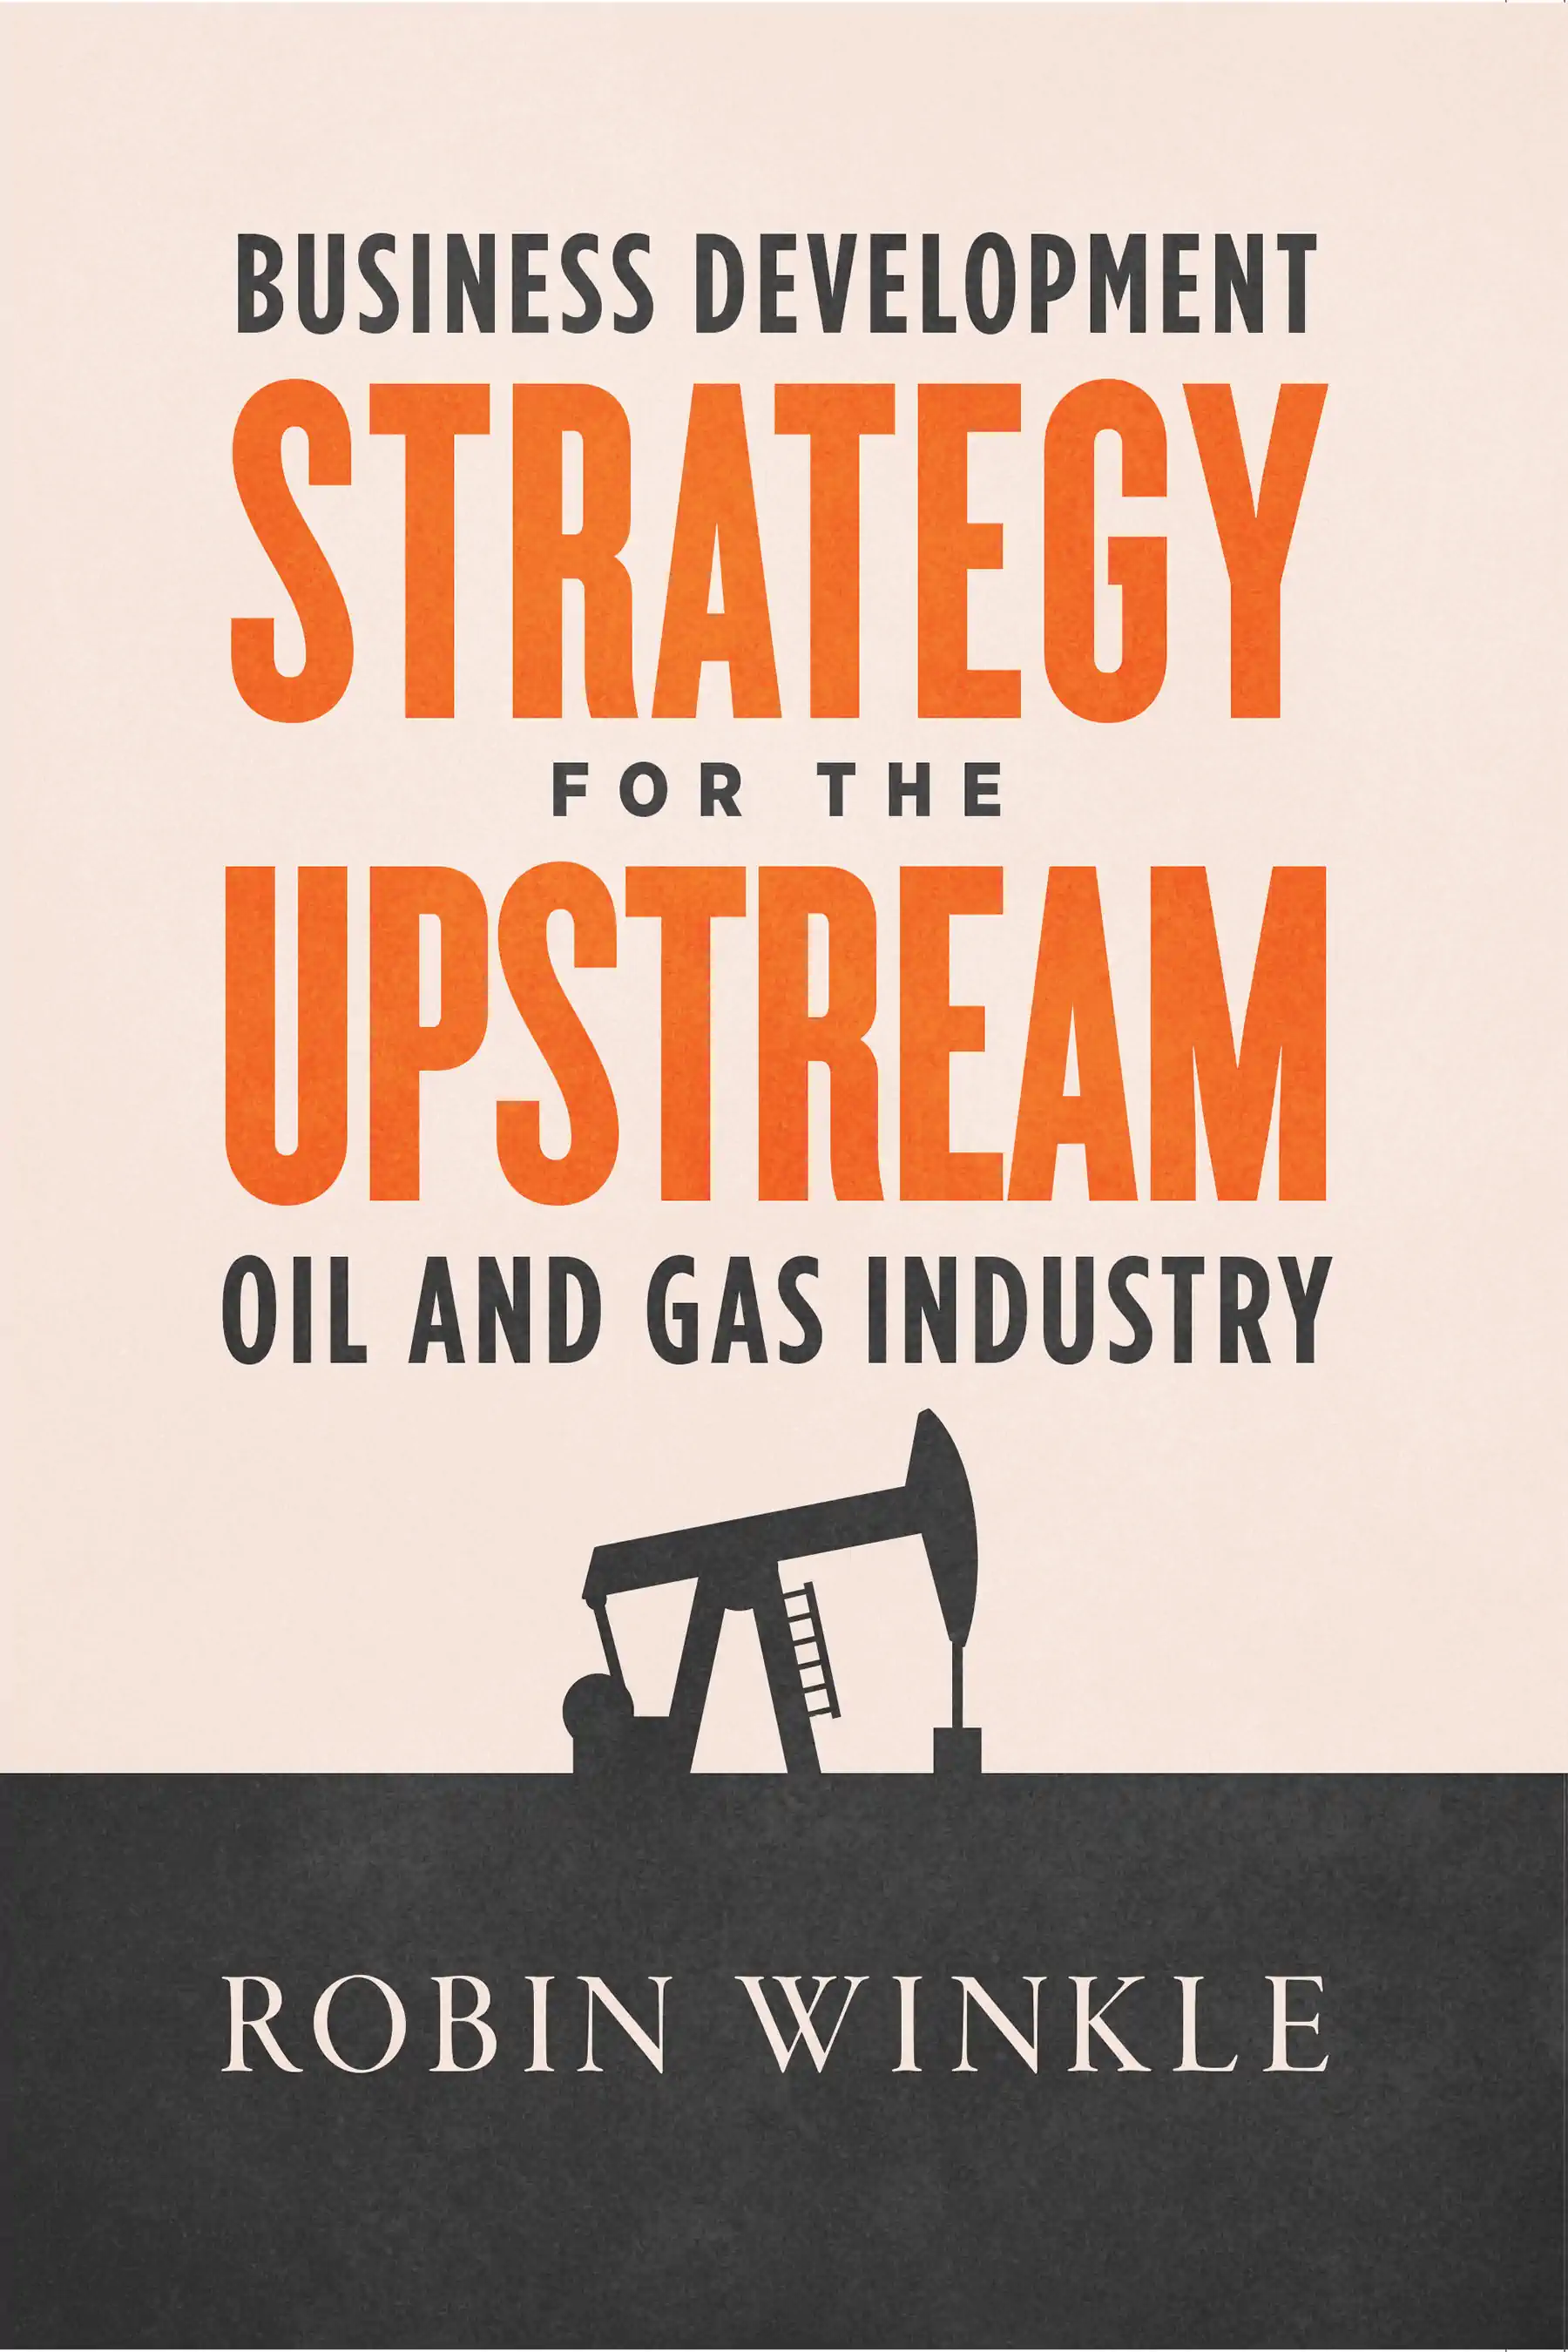 Link the page on Business Development Strategy for the Upstream Oil and Gas Industry, where you can find more information and order the book.